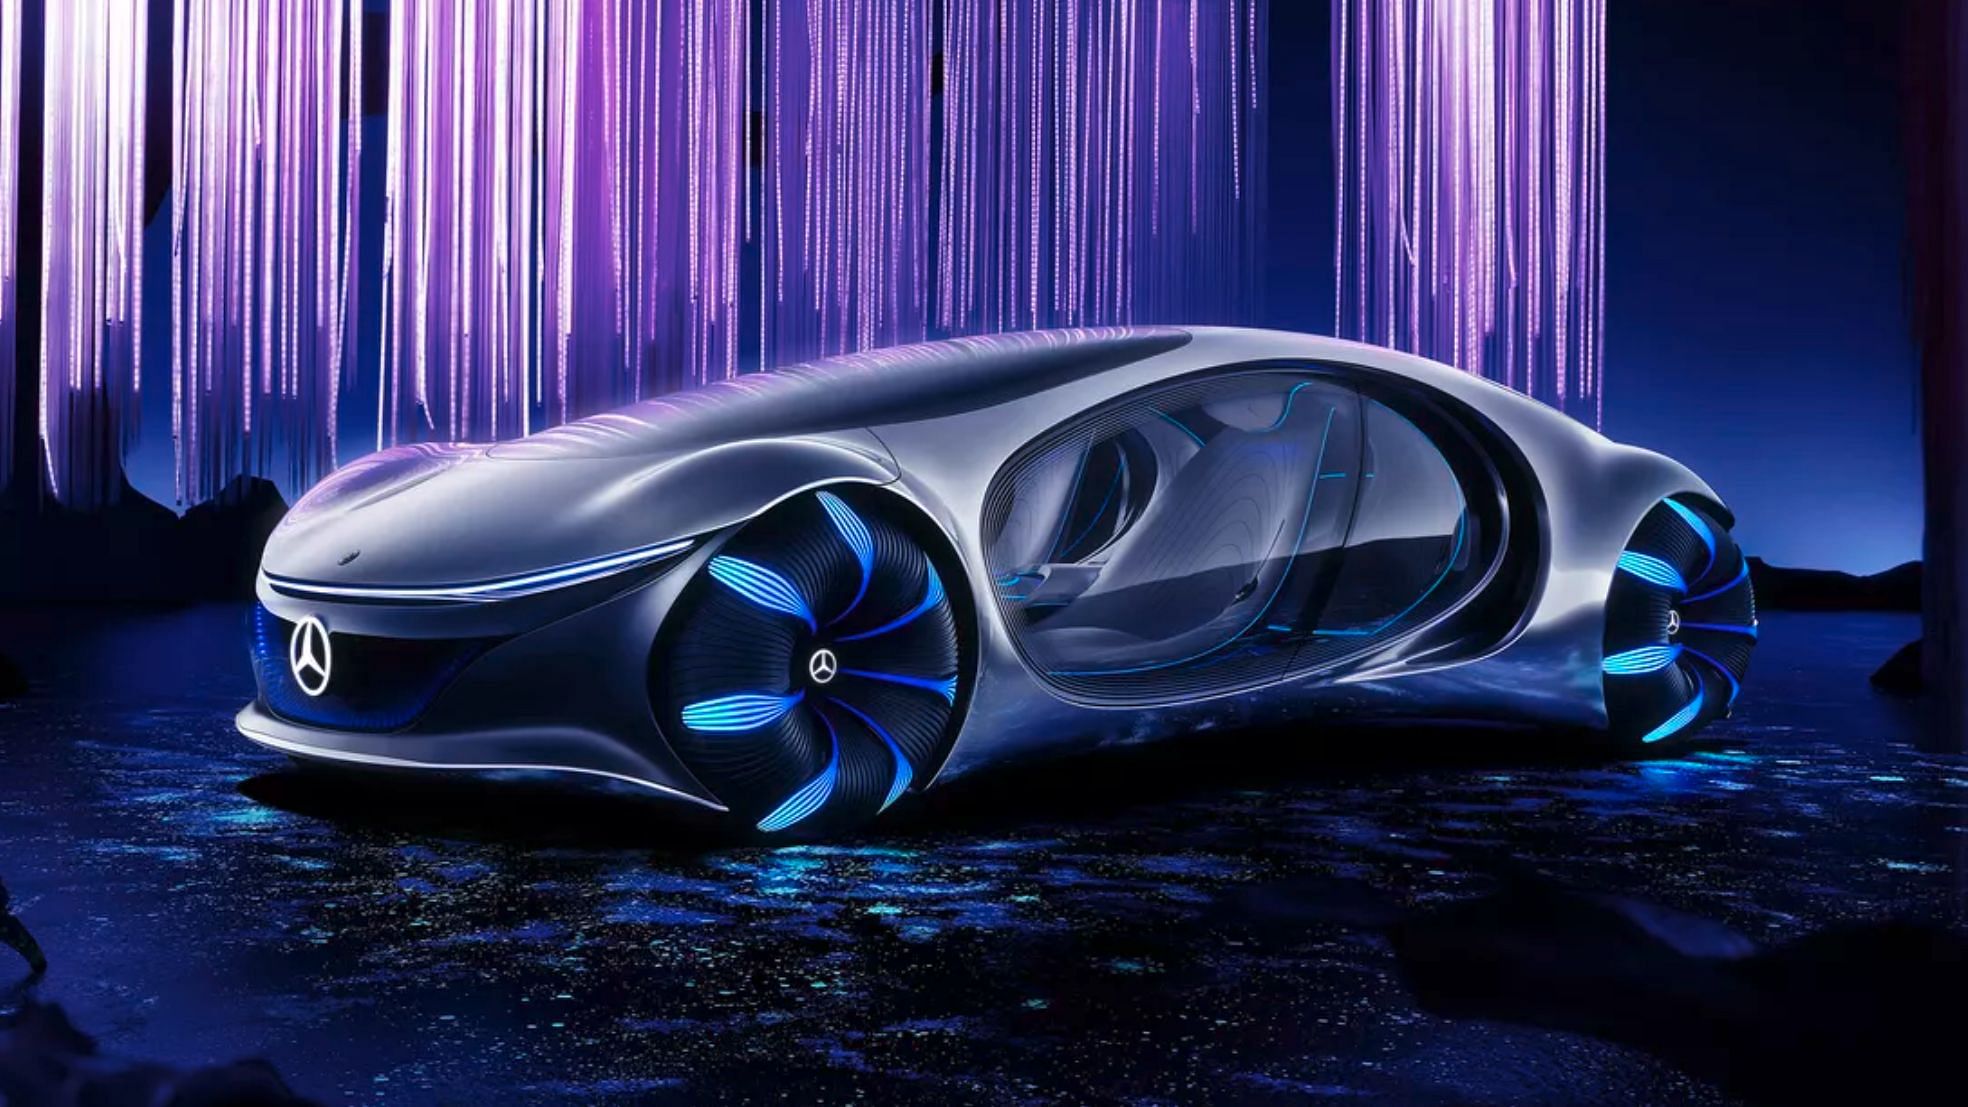 This Mercedes concept car has been inspired from the Hollywood movie Avatar.